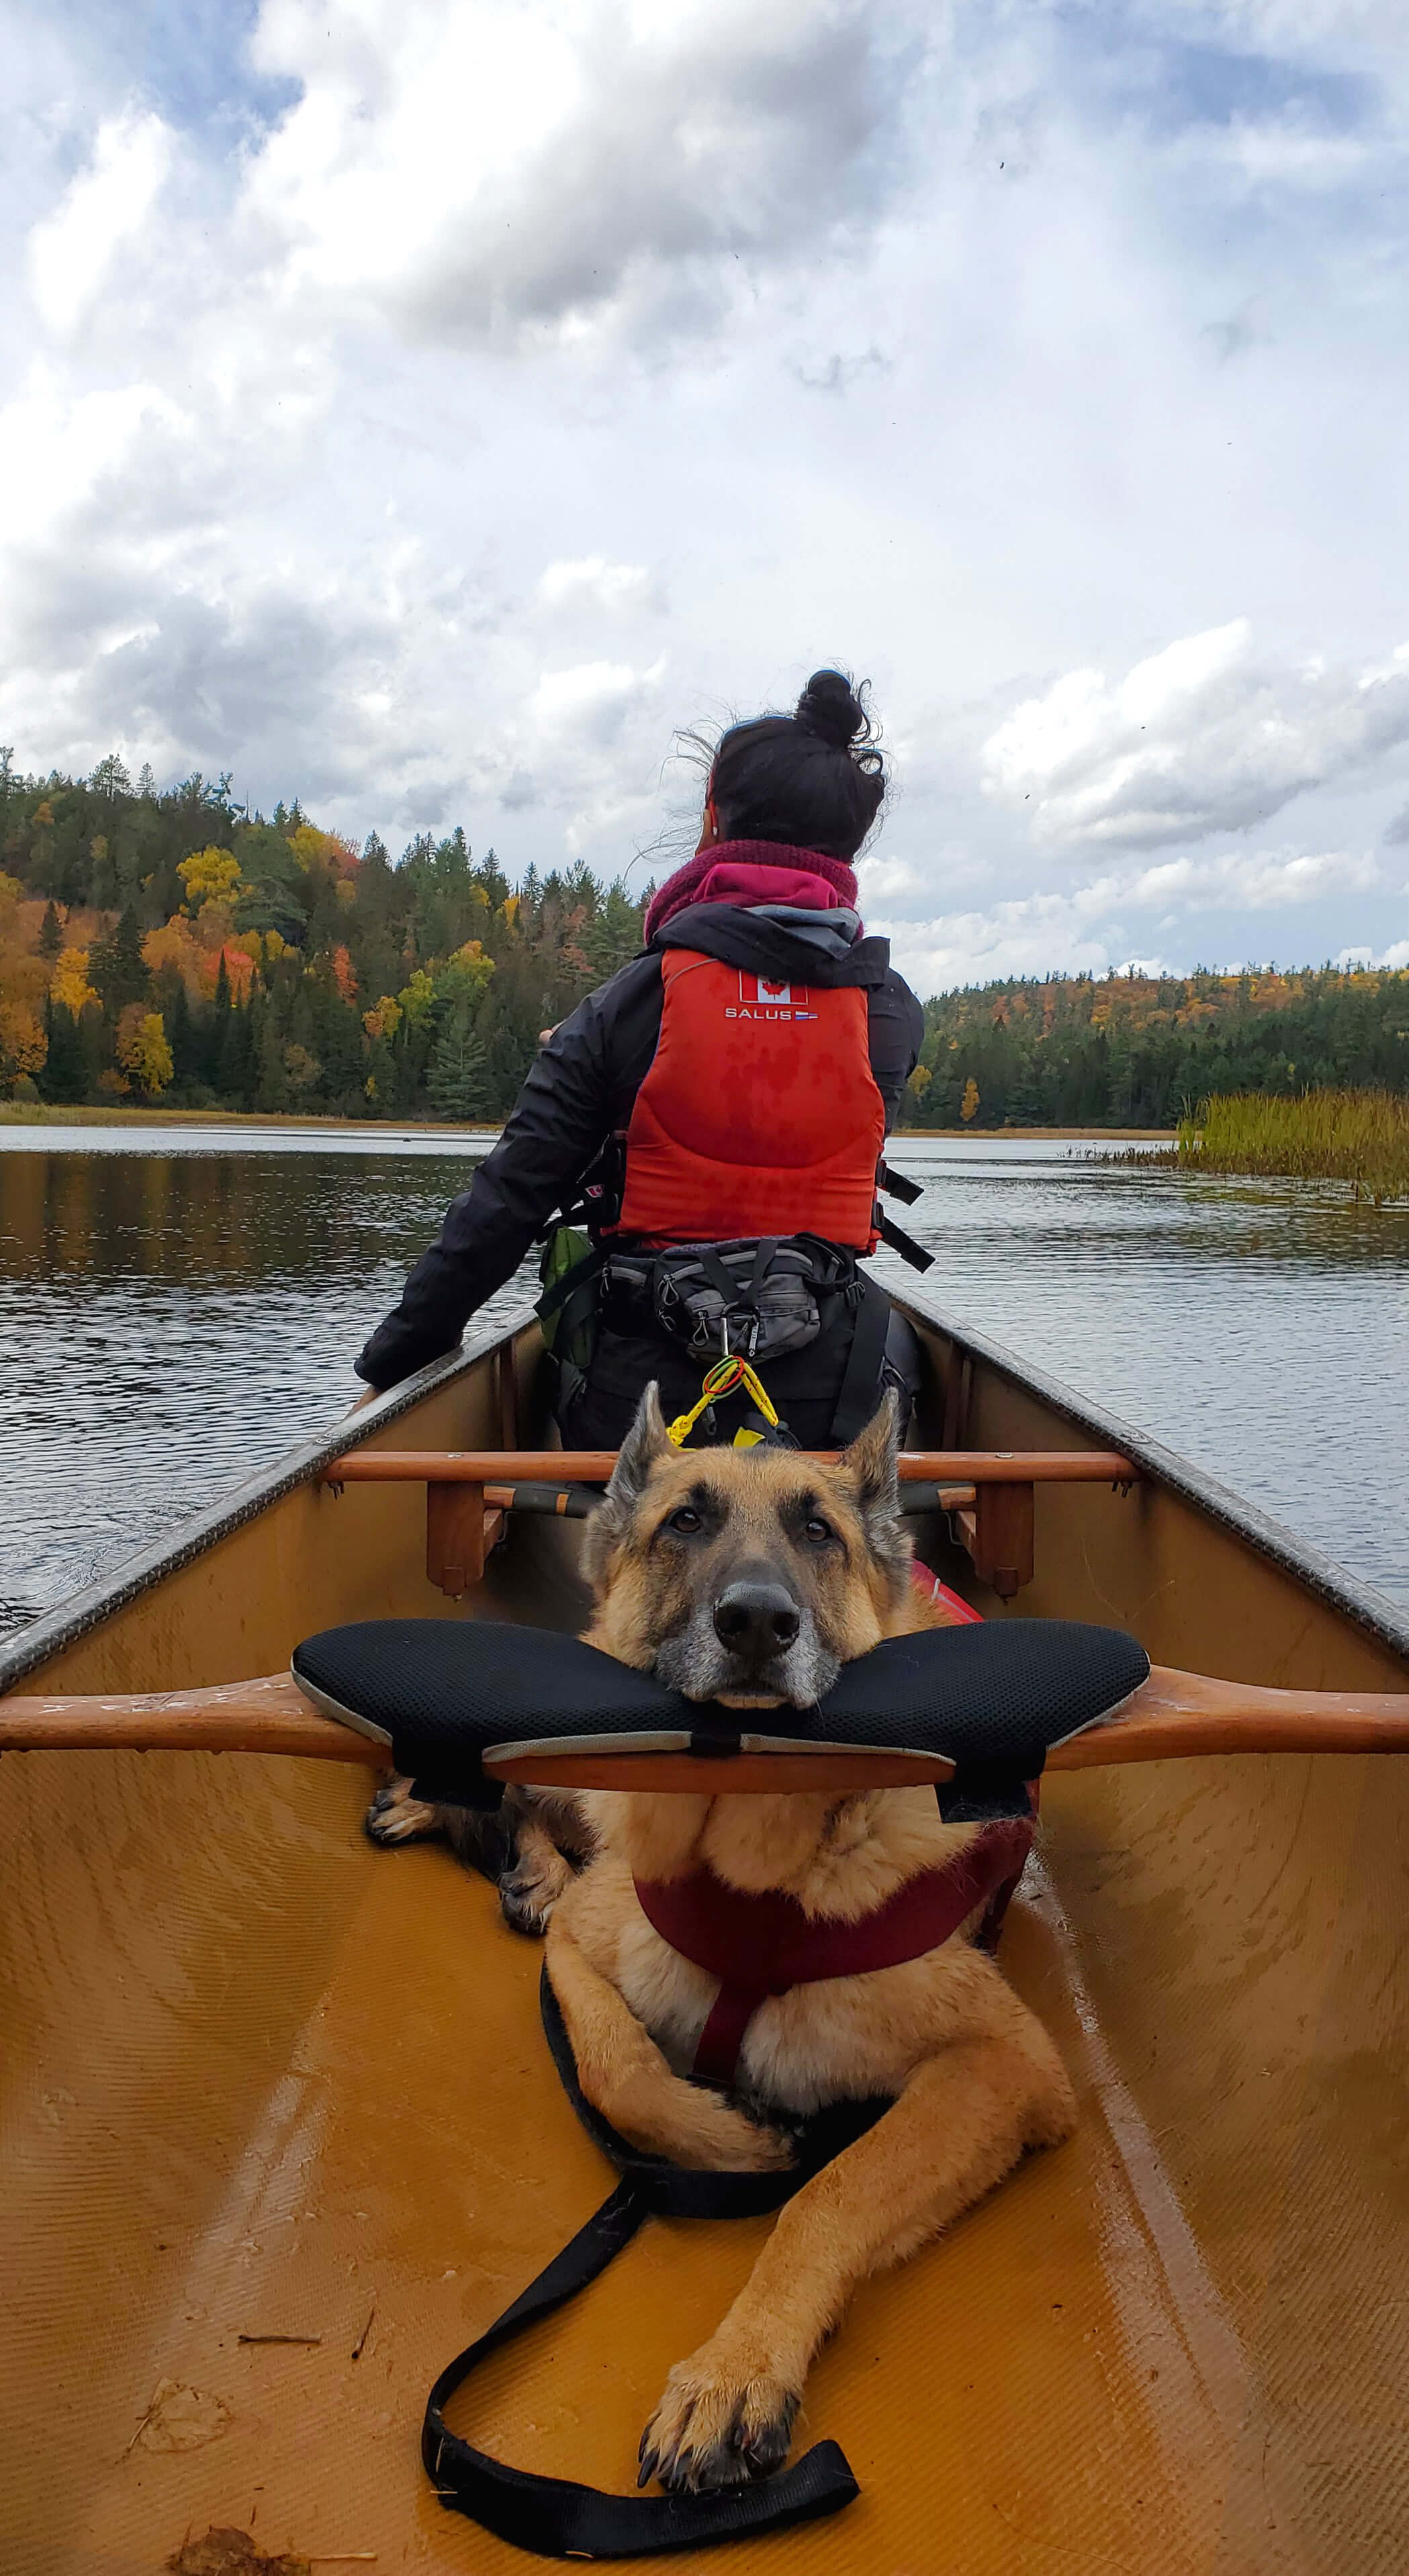 Woman and dog on canoe on a lake